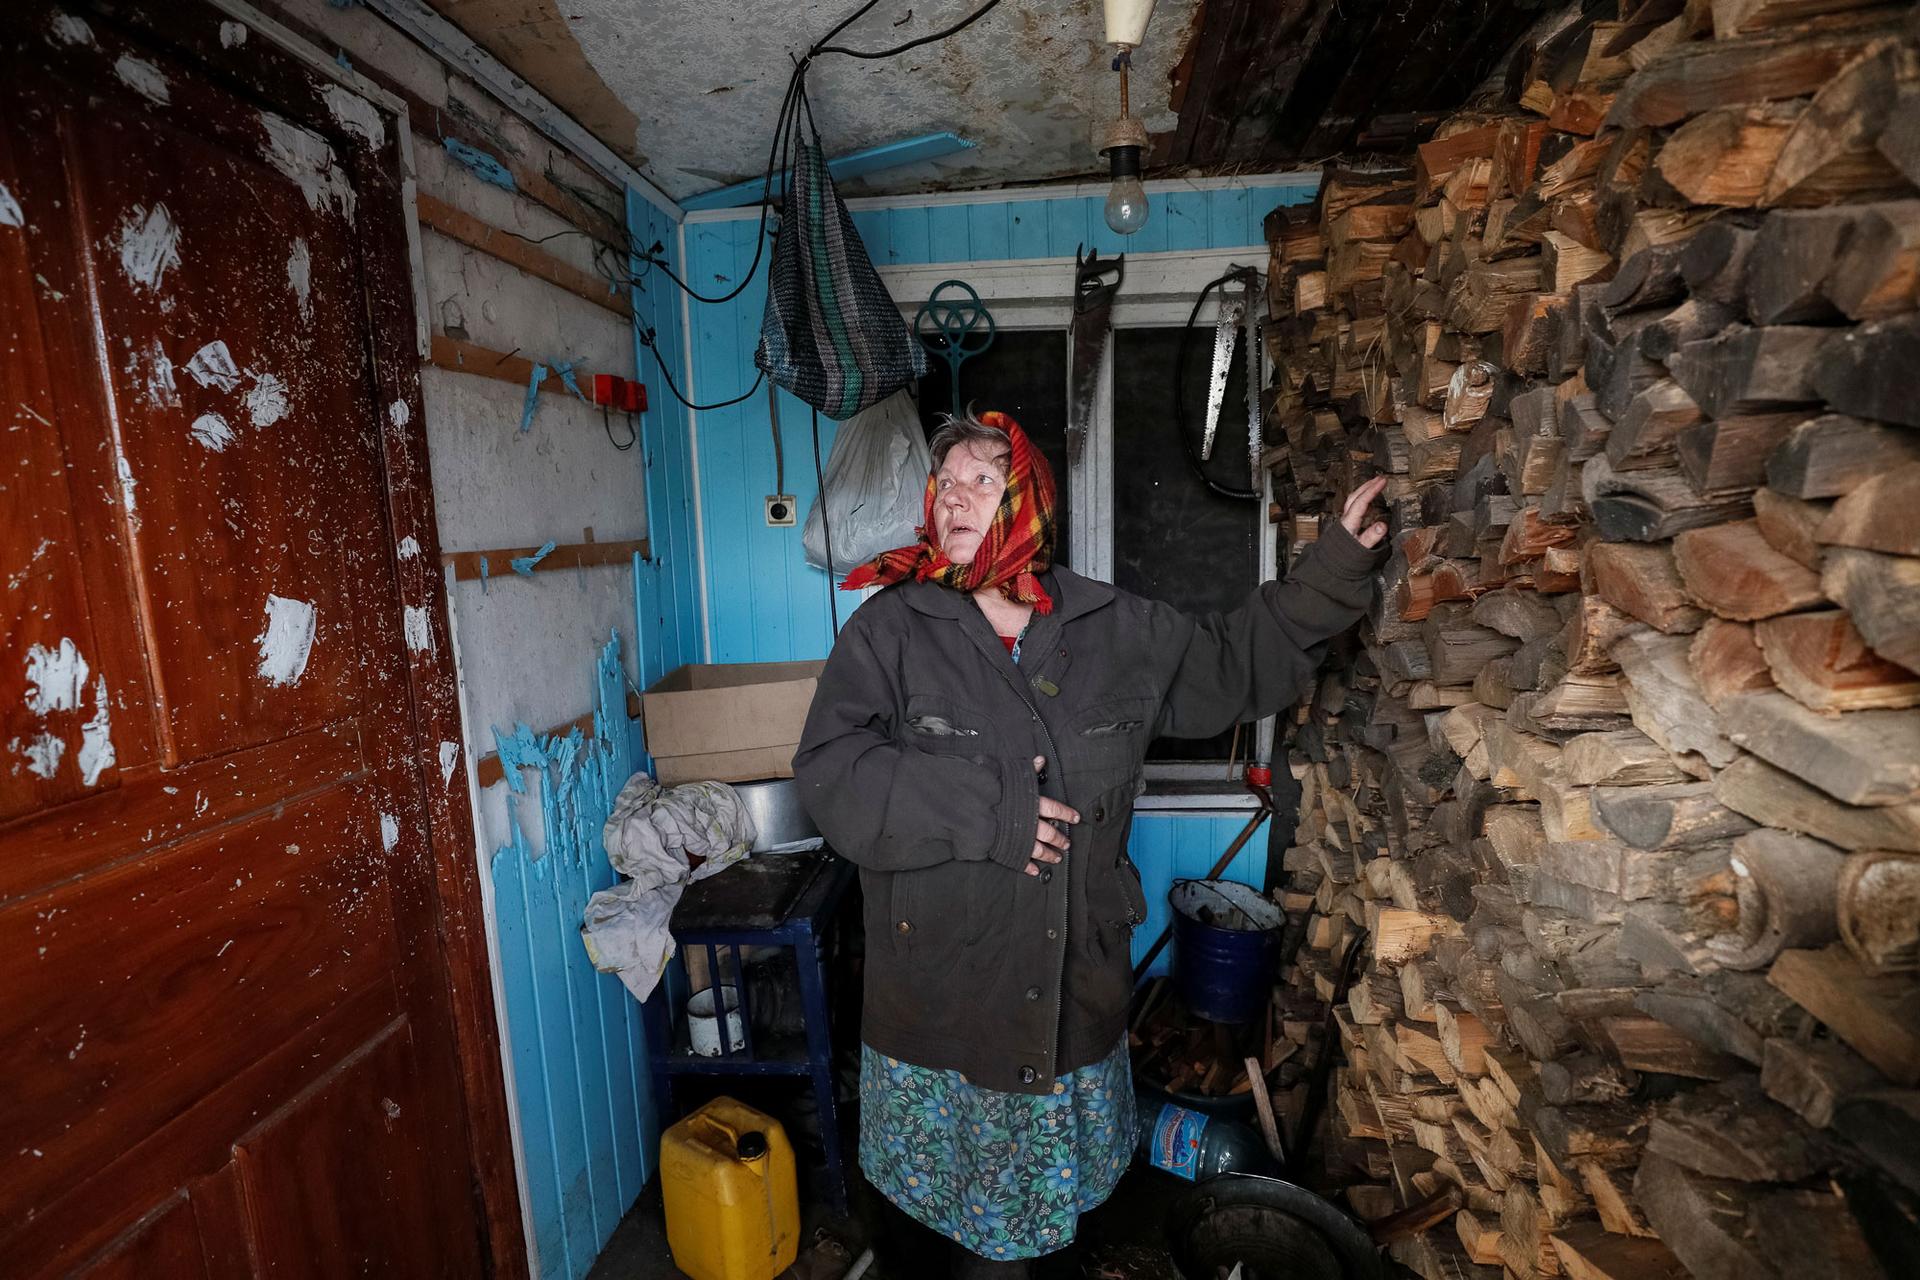 A woman is shown with her hand on a wall of firewood looking to her right at bullet holes in door.